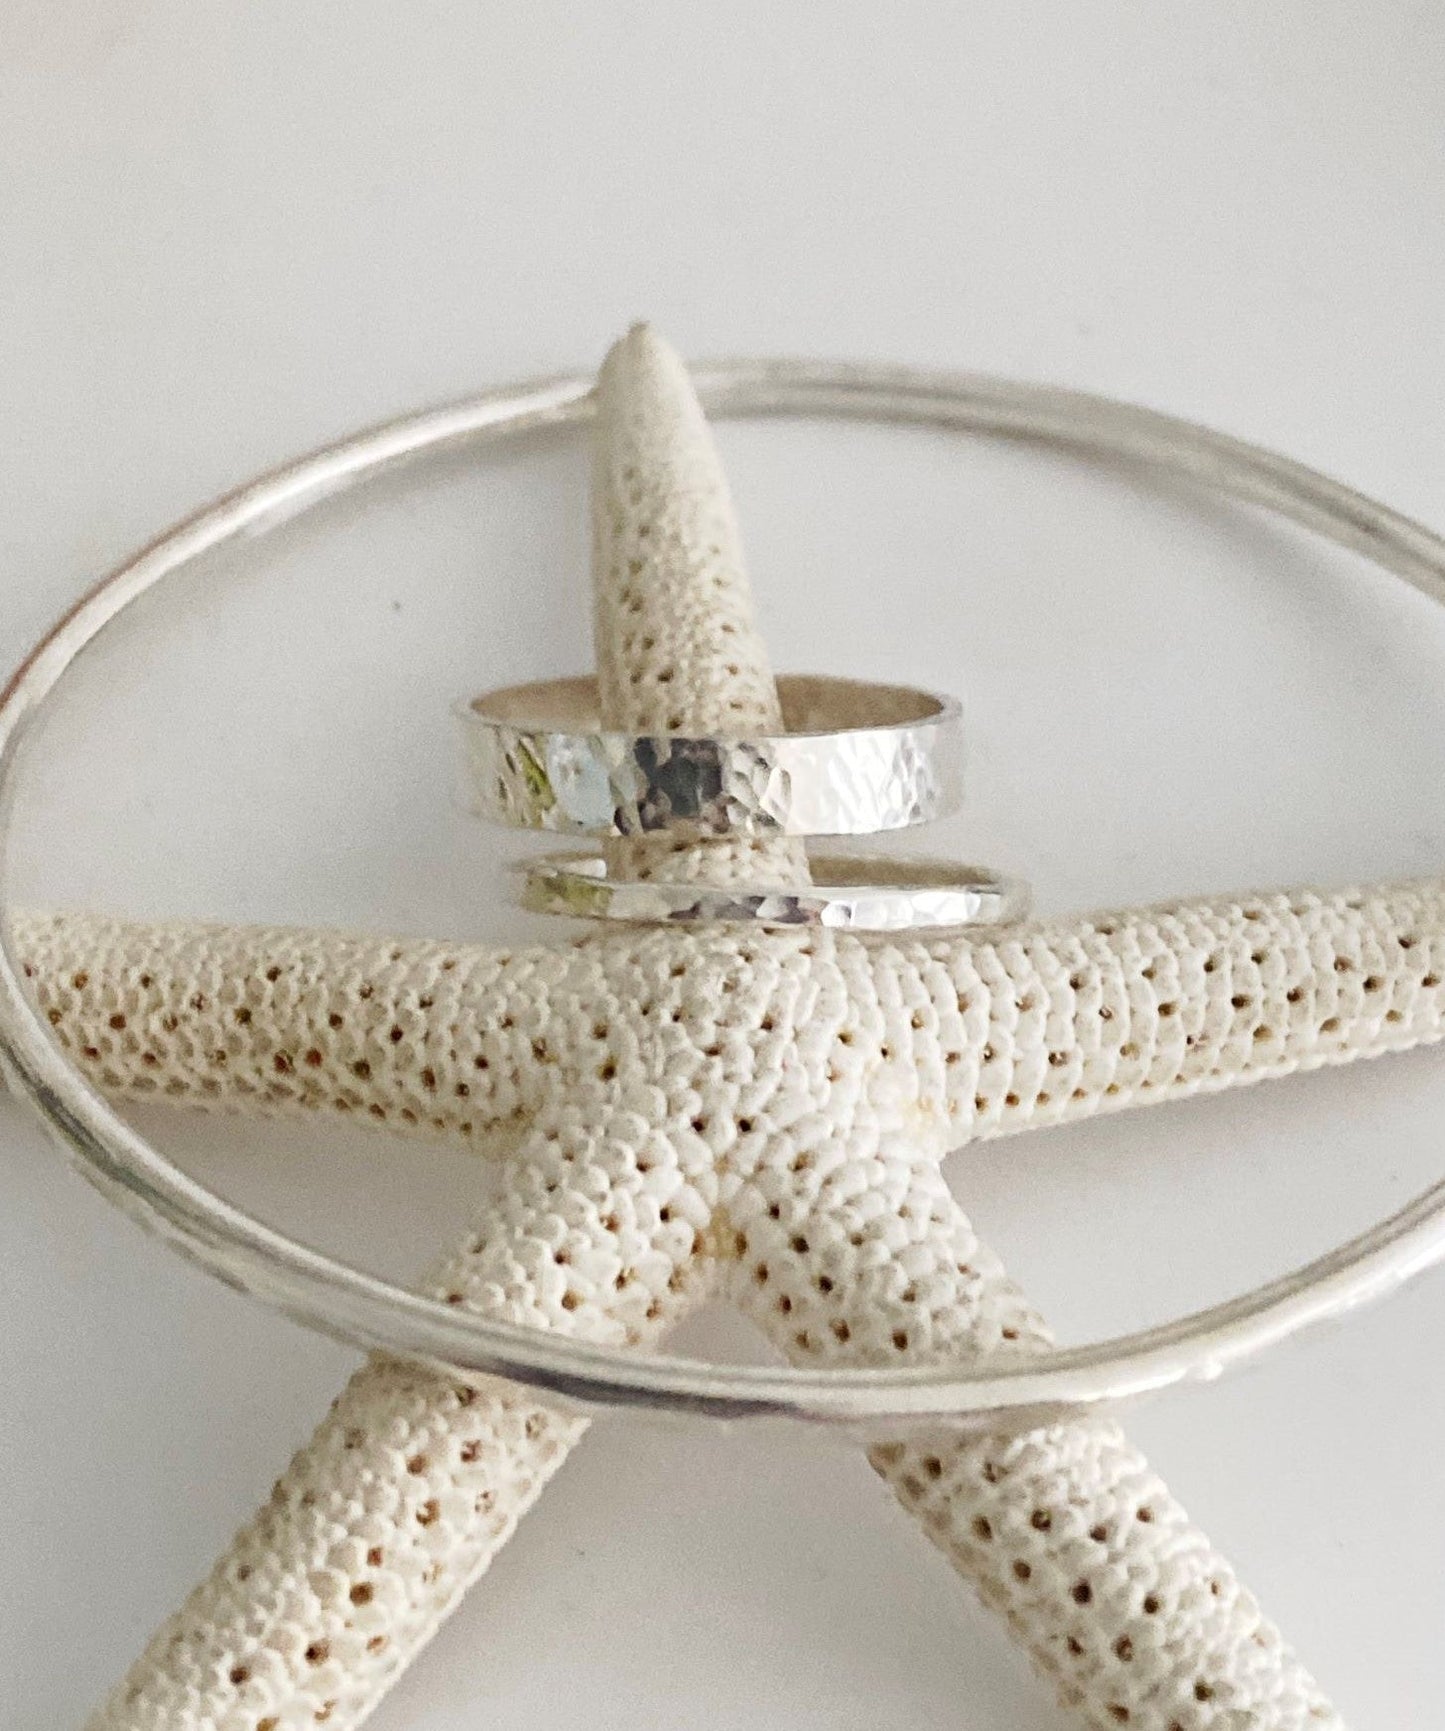 Mother & Daughter Ring & Bangle Afternoon Workshop~ Saturday 22nd June 2pm - 4.30pm